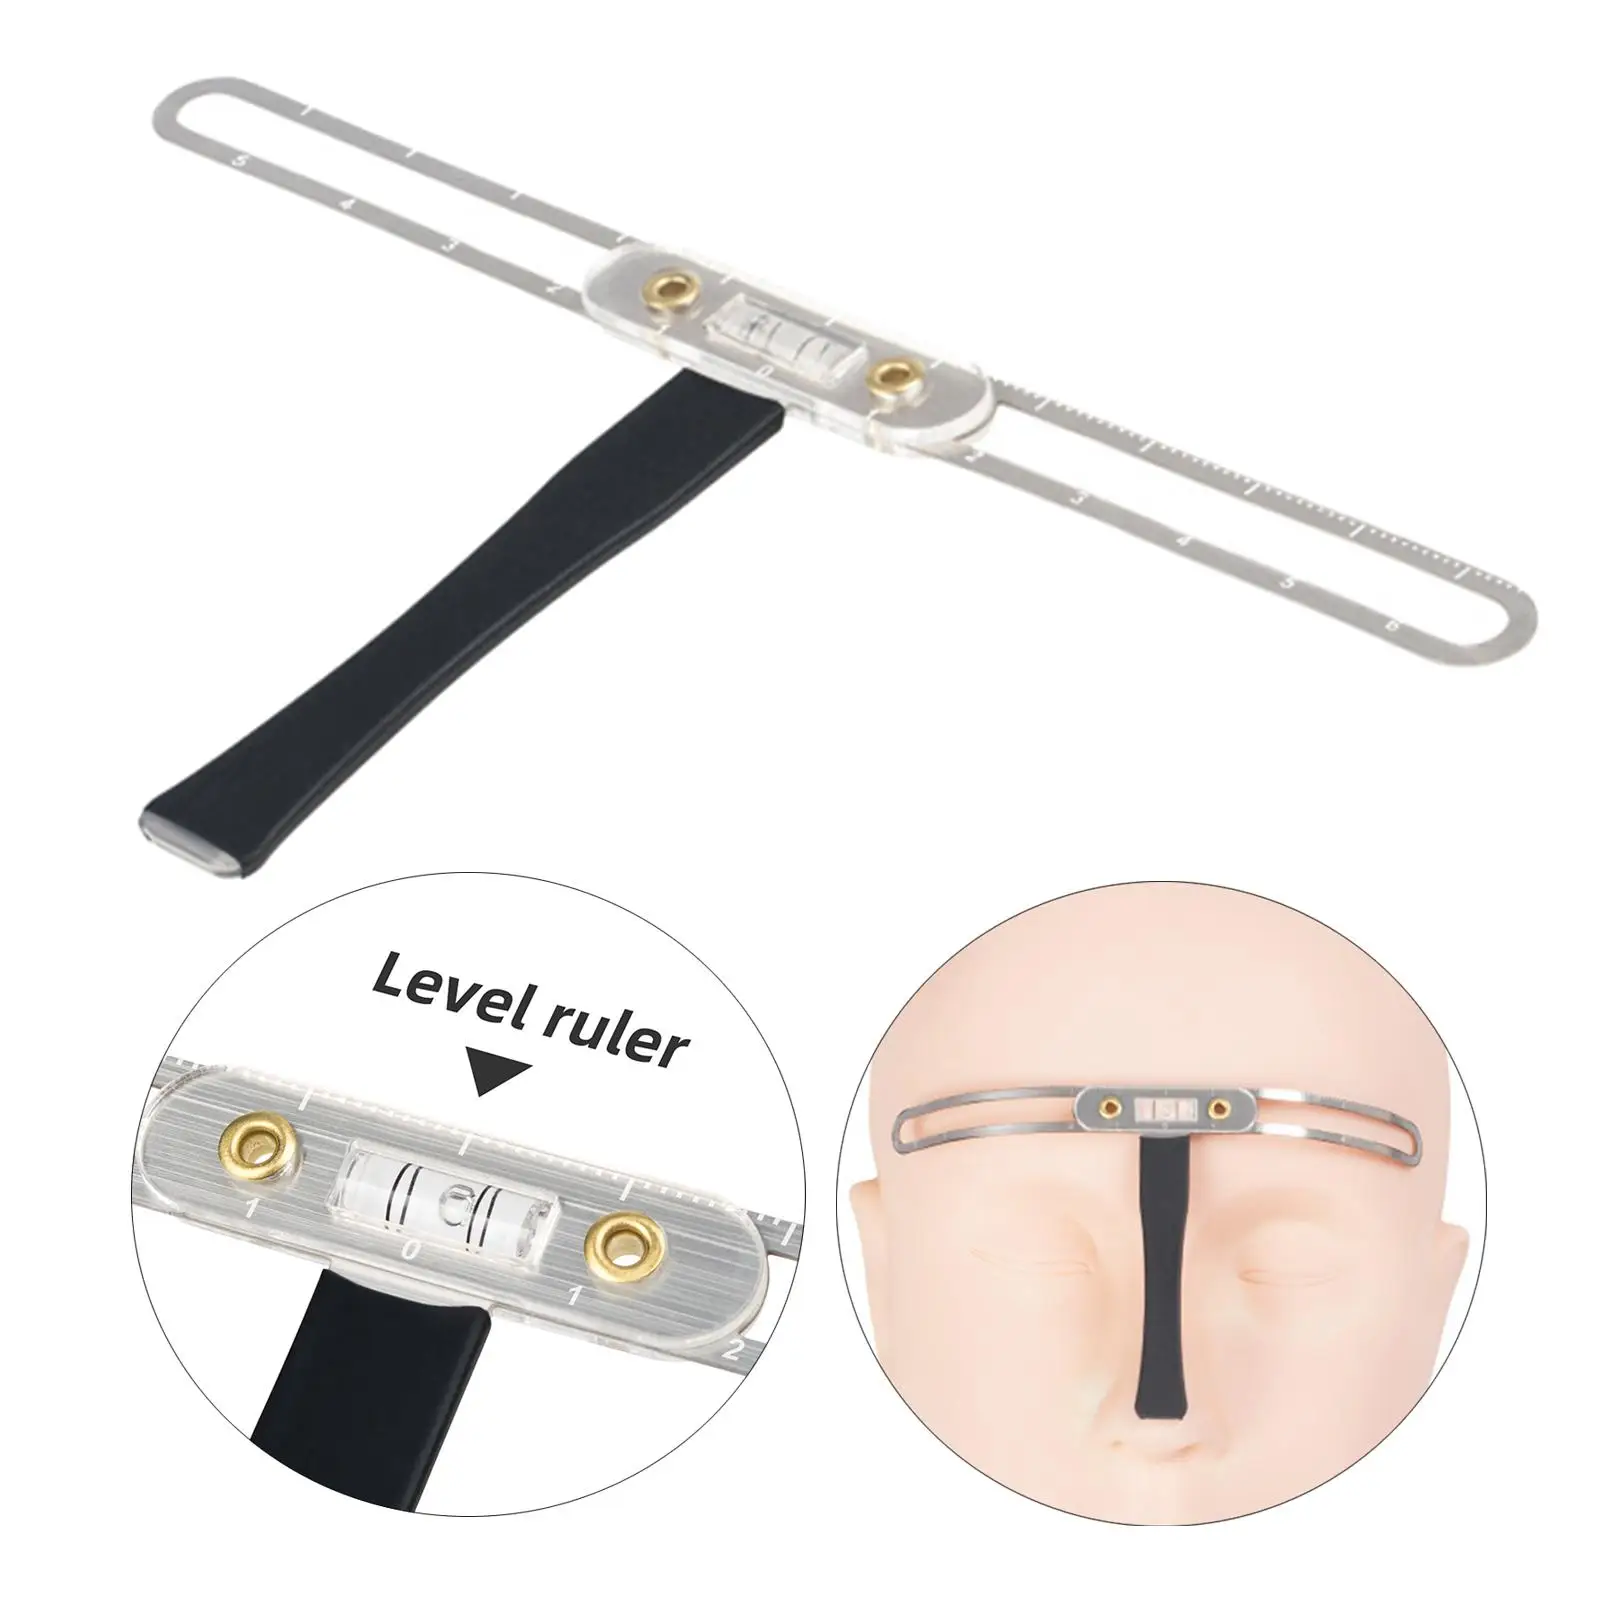 Classic Eyebrow Caliper Measure Ruler Eyebrow Extension Grooming Stencil Shaper Makeup Supplies  Tool  Positioning Shaping